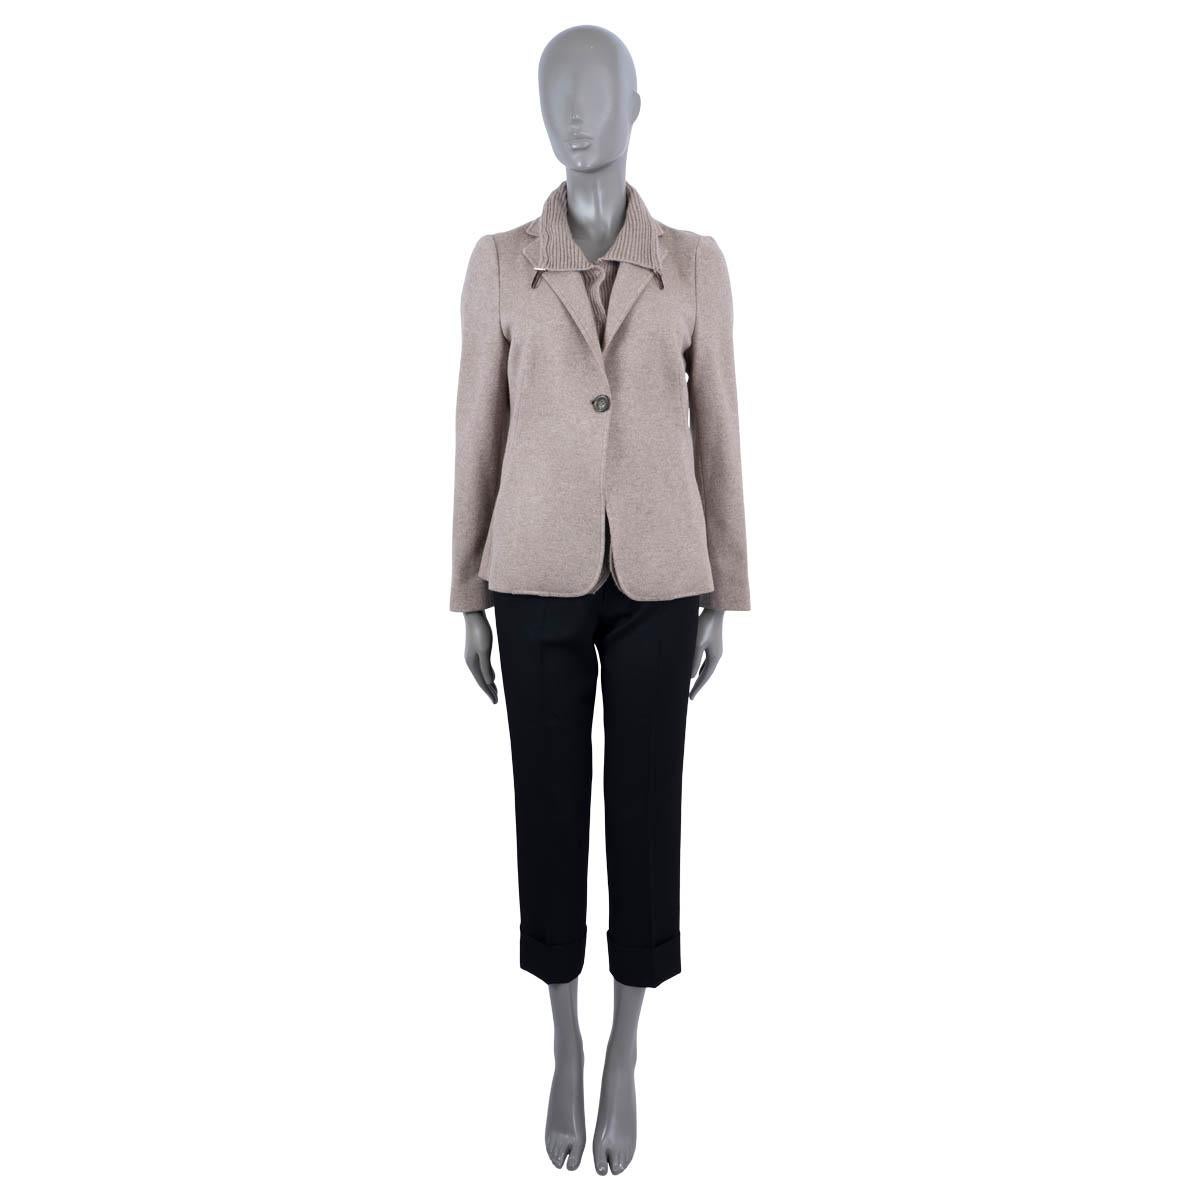 100% authentic Brunello Cucinelli slightly flared one-button blazer jacket in taupe wool (70%), cashmere (20%) and silk (10%). The design features a buttoned inside soft rib-knit layer in cashmere (100%) and a collar with drawstring. Two slit